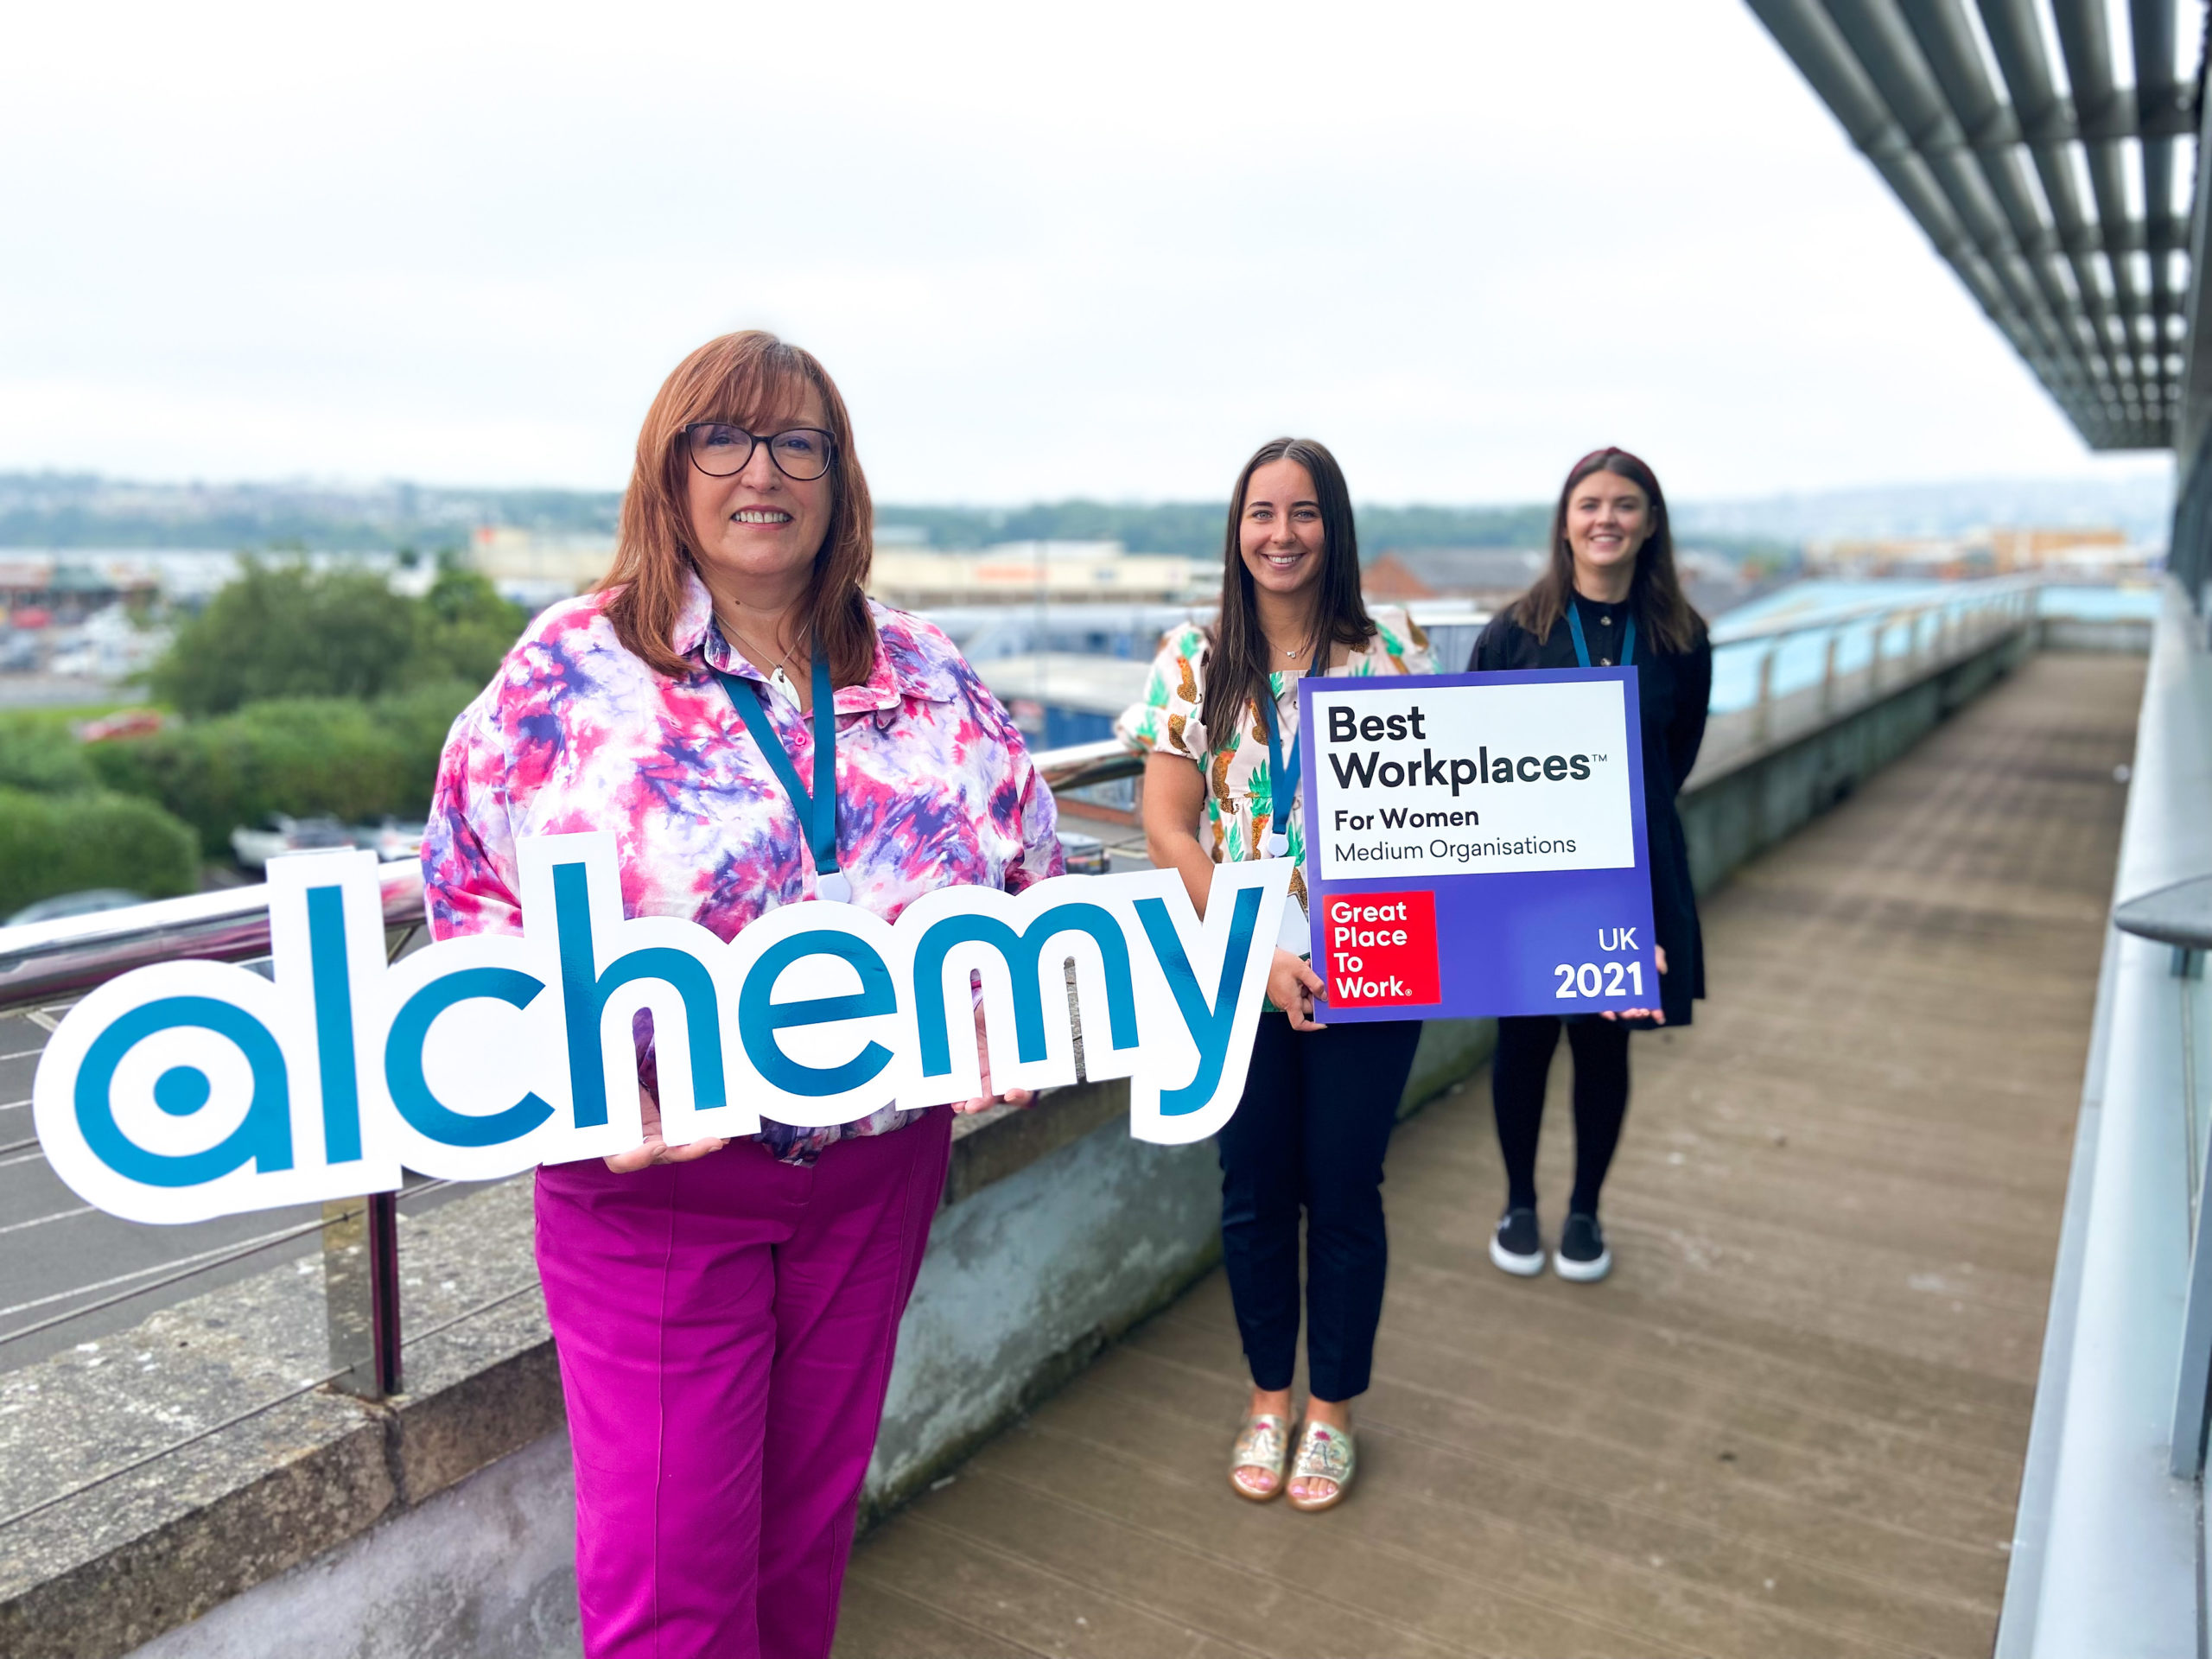 Alchemy Technology Services ranked number 11 on the UK’s Best Workplaces™ for Women List 2021